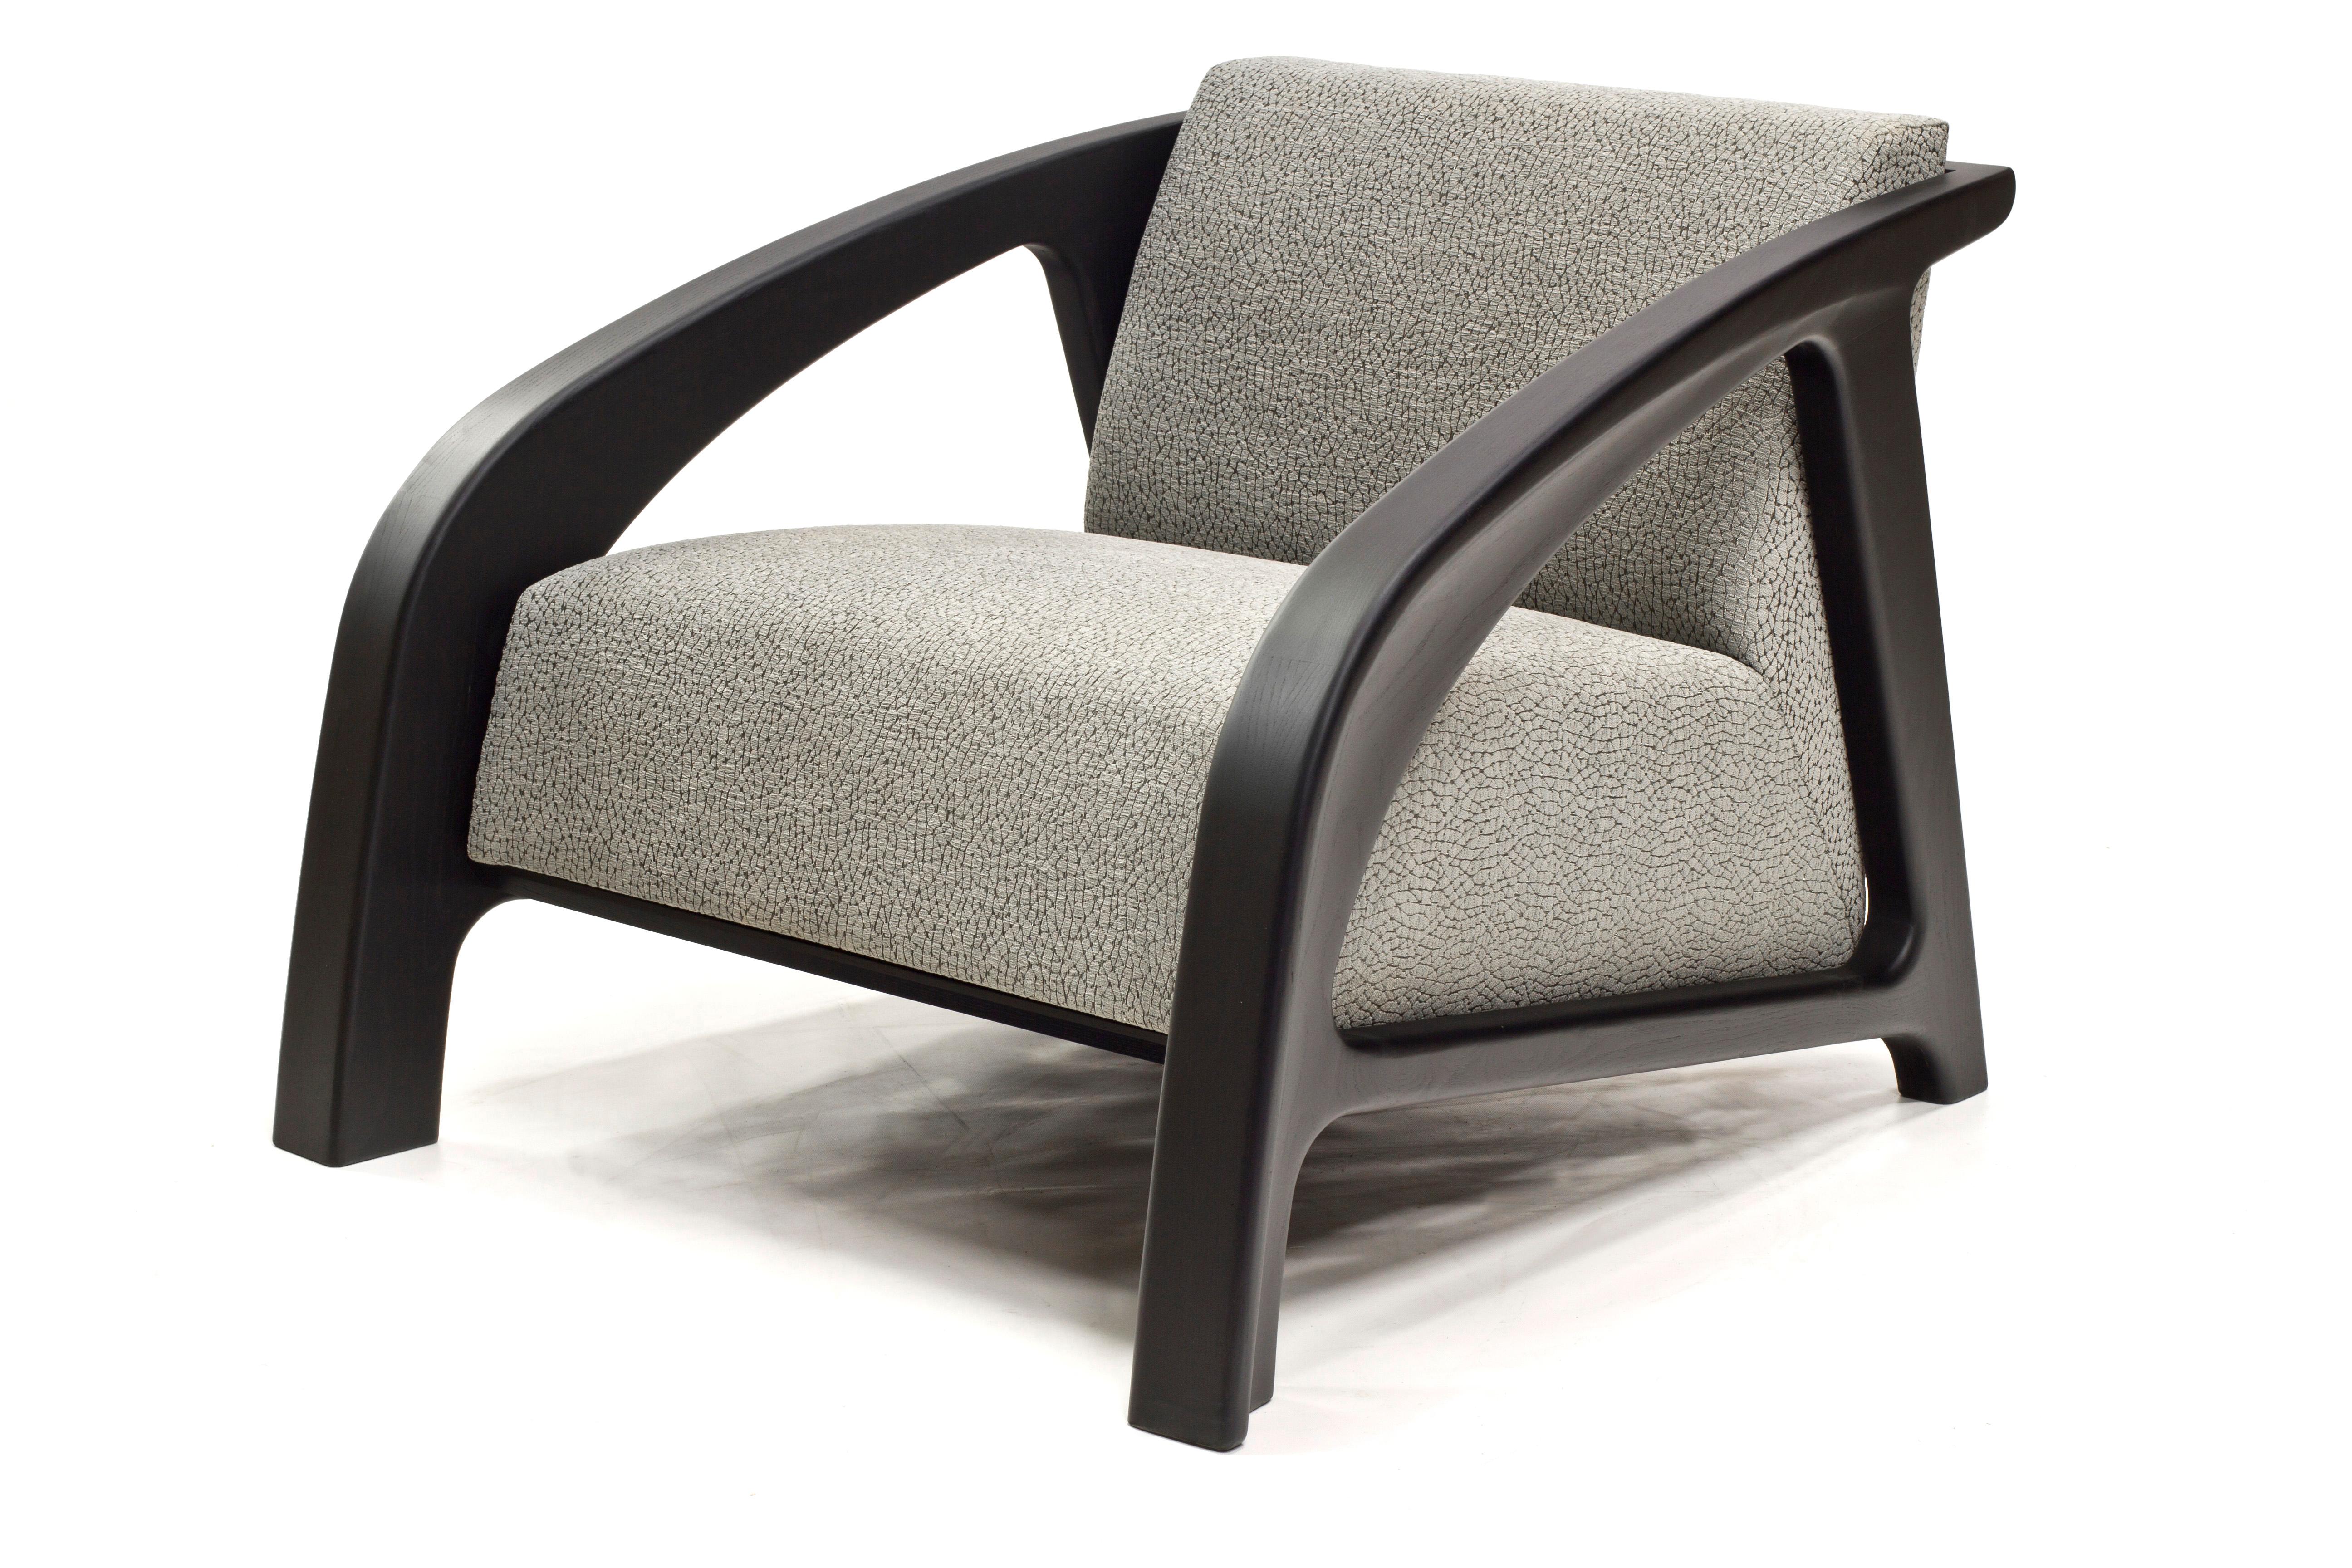 For this Wooda original design, we were looking for a supremely comfortable lounge chair. This contemporary take is loosely based on a 1920s vintage design. Cambre invites you to get comfortable. The deep seat and cantilevered angle offers the